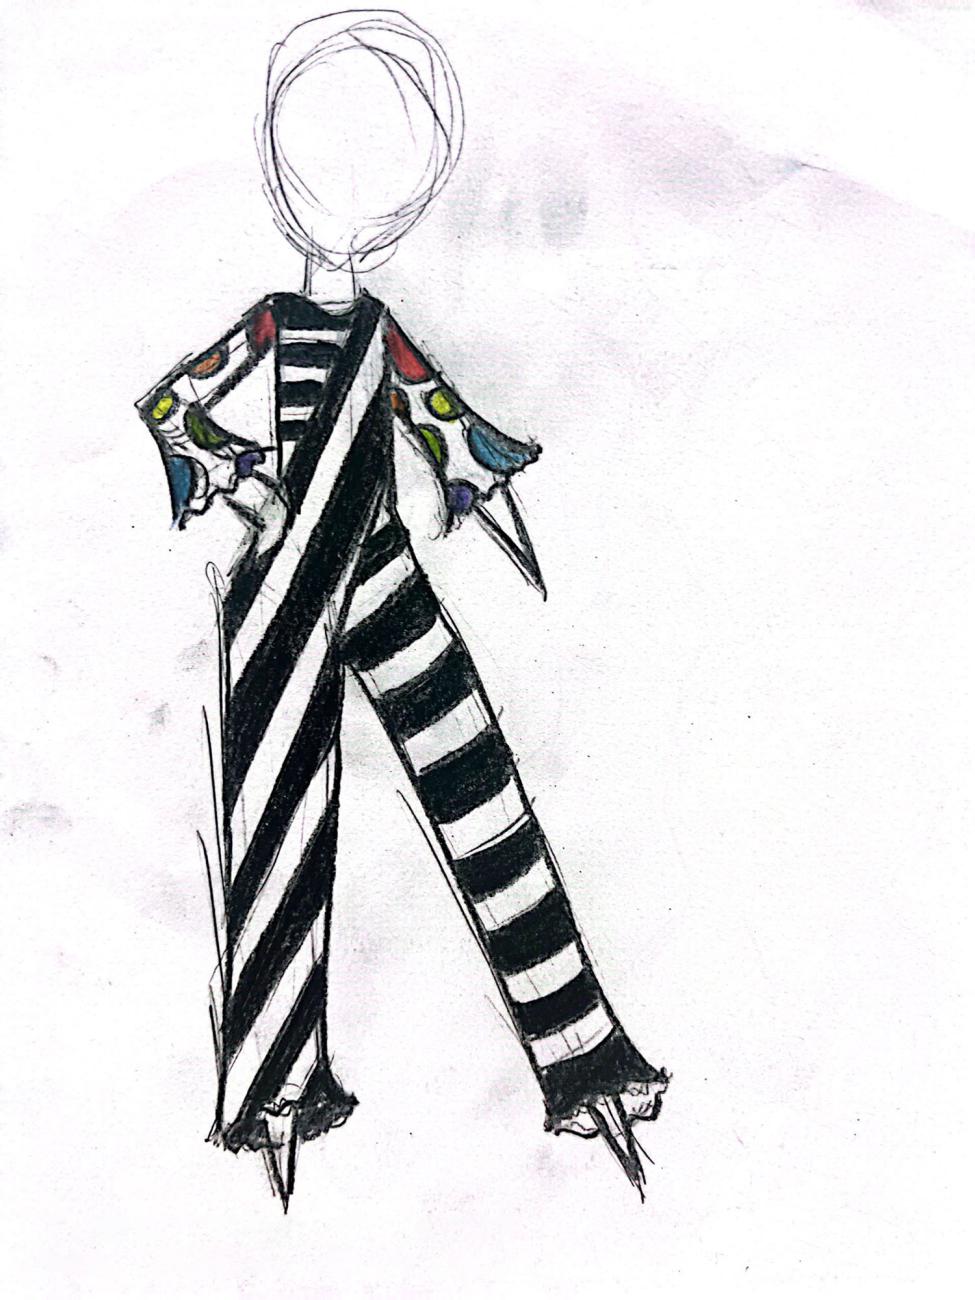 An illustration of a full-bodied outfit of layers of black and white stripes, with colourful large-spotted sleeves.